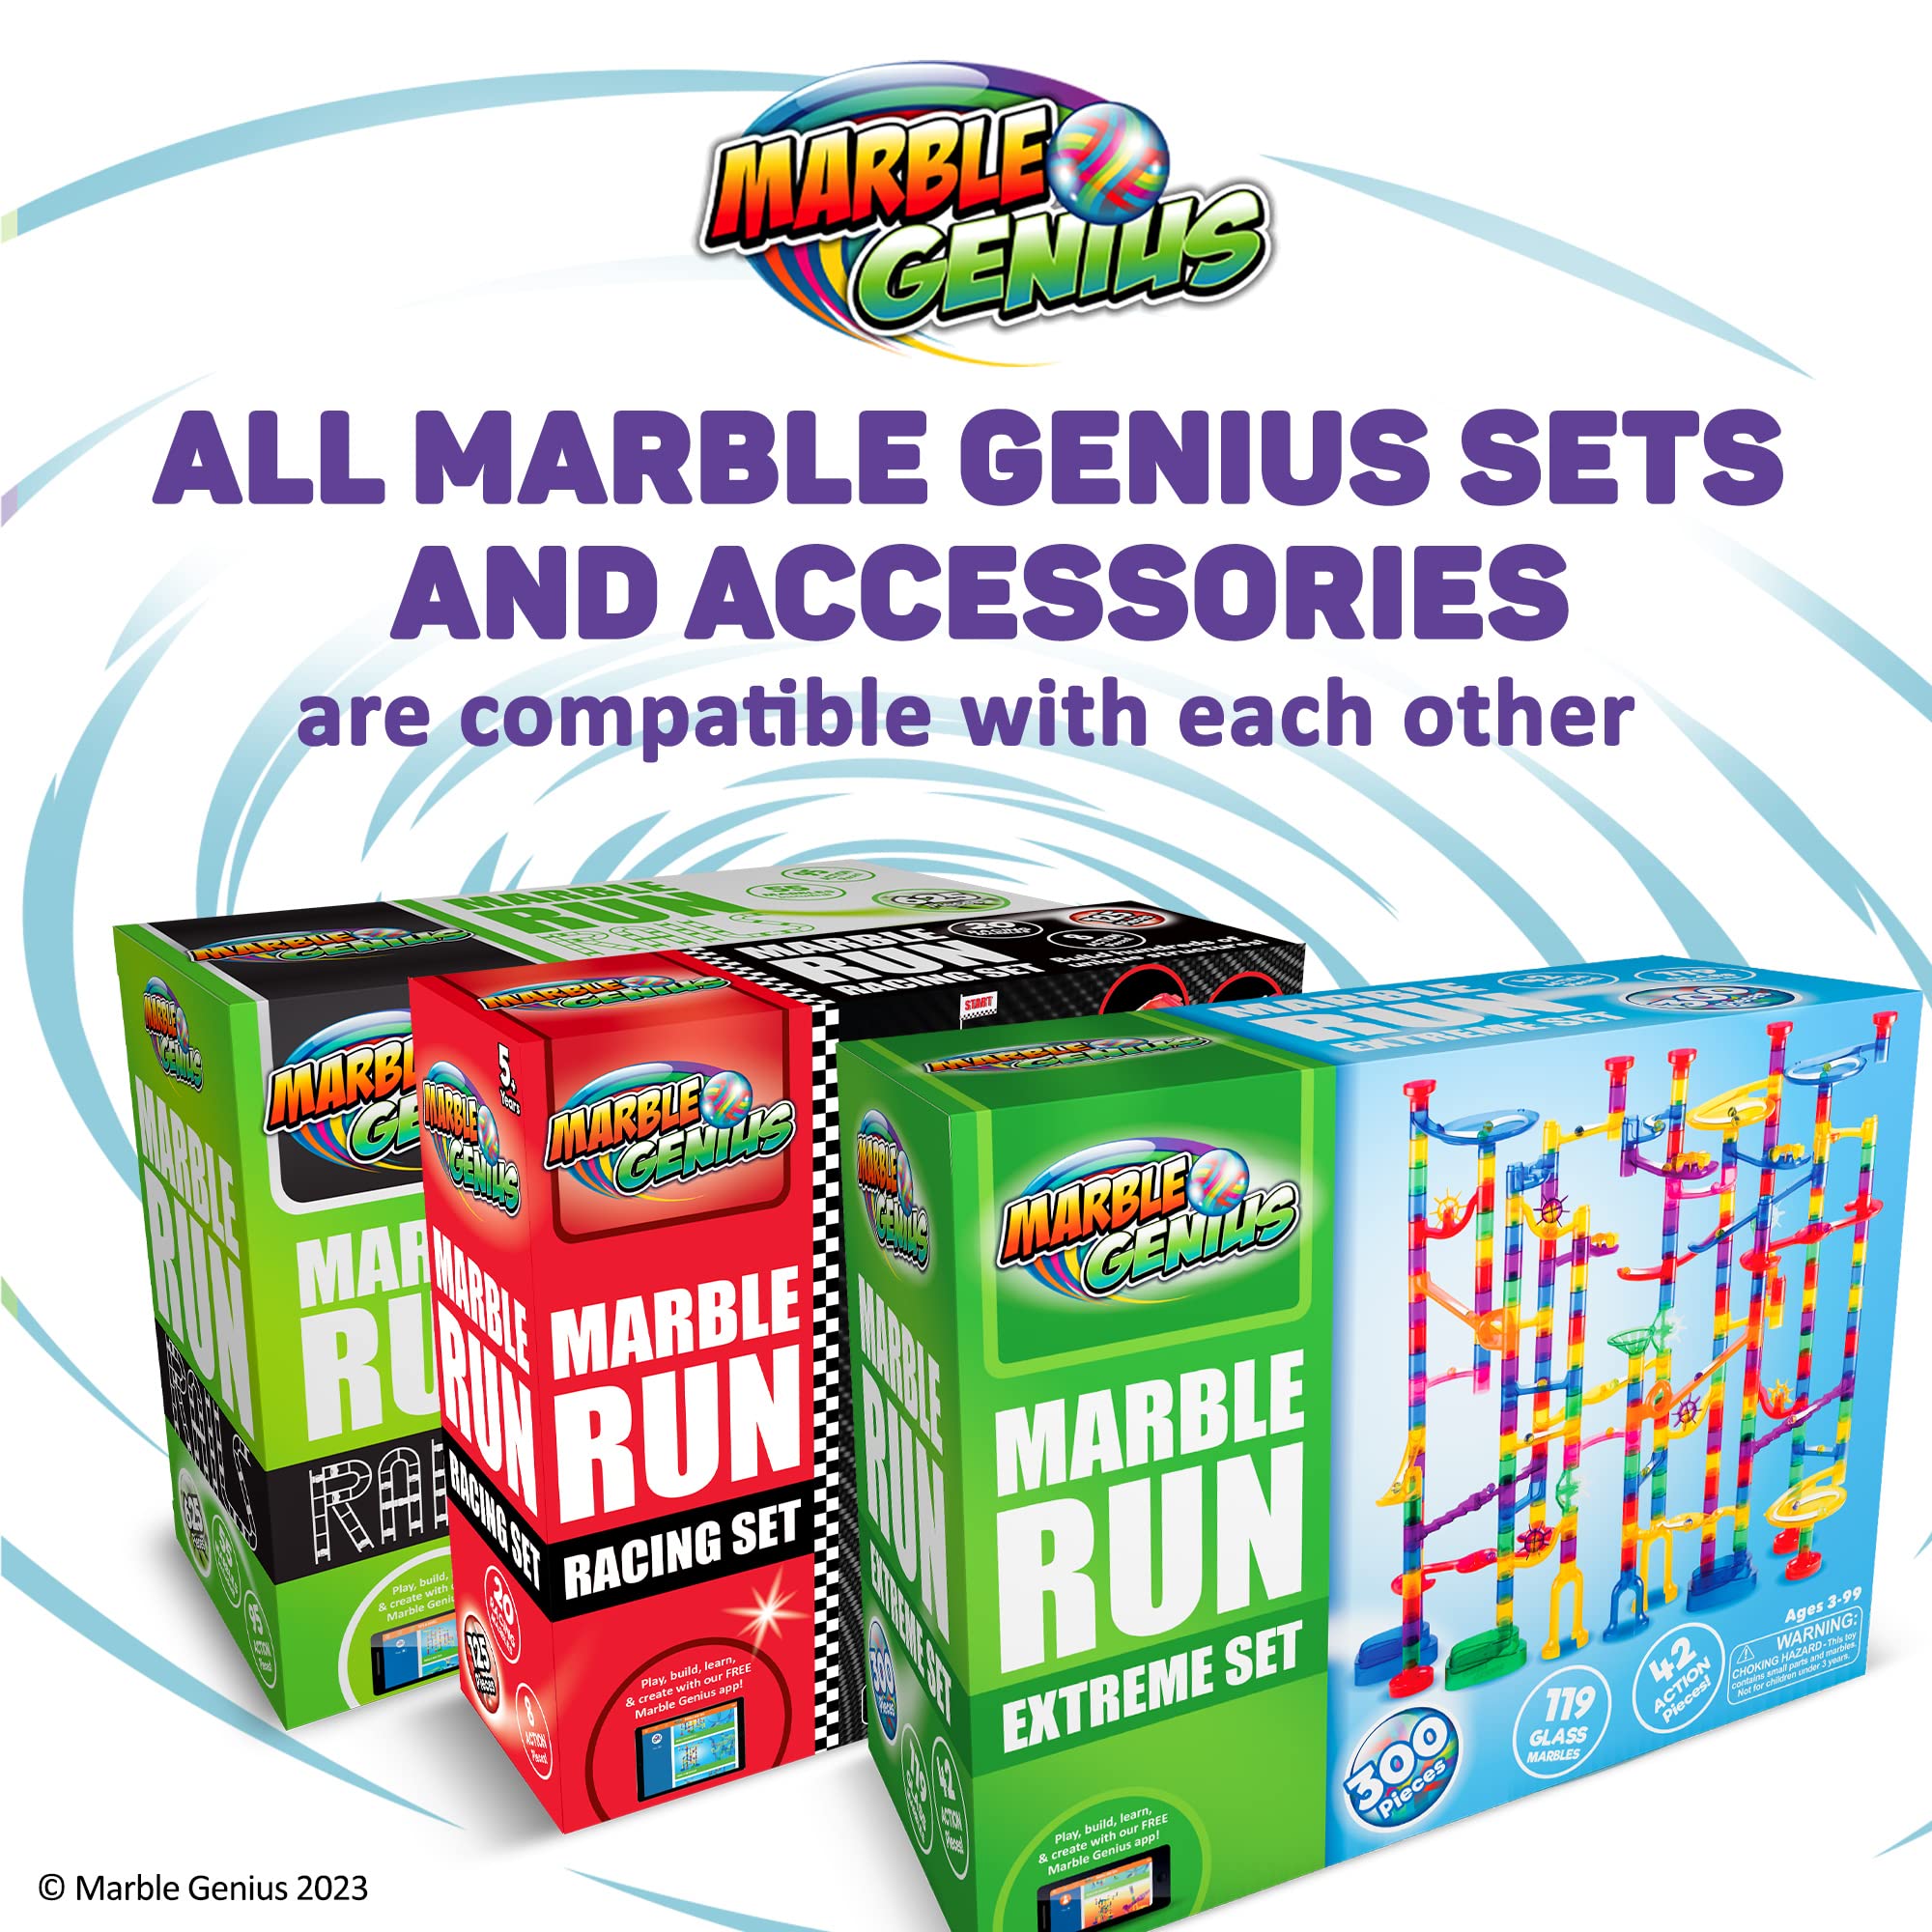 Marble Genius Marble Run (300 Complete Pieces) Maze Track or Race Game for Adults, Teens, Toddlers, or Kids Aged 4-8 Years Old, (118 Translucent Marbulous Pieces + 119 Glass-Marble Set), Extreme Set